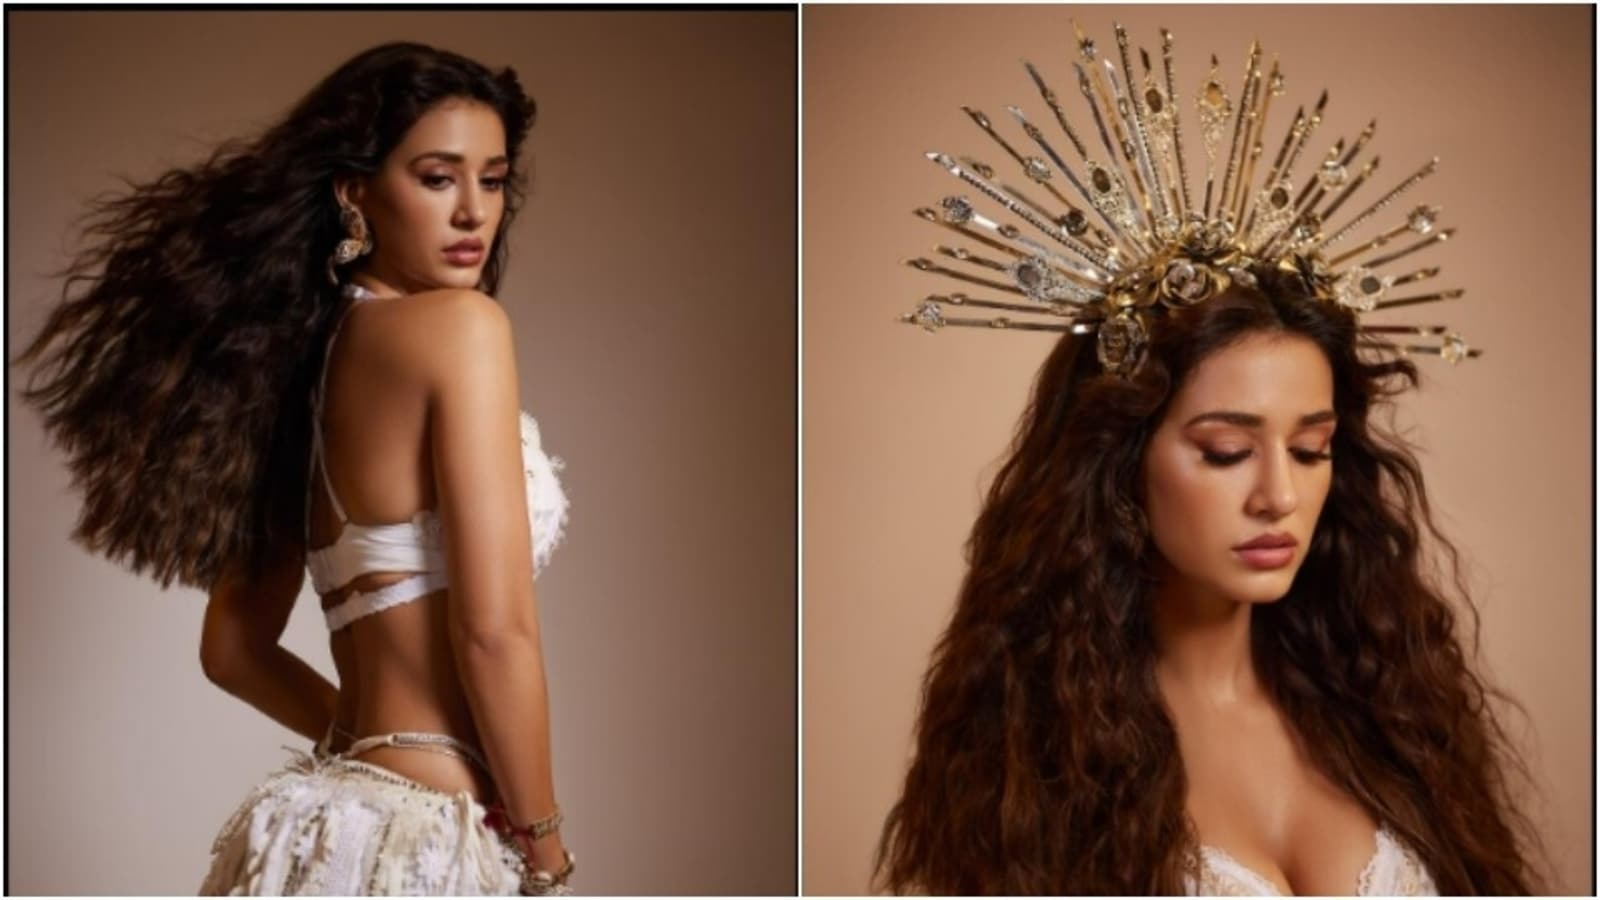 Disha Patani, in a white feather attire, is giving us queen of the jungle vibes